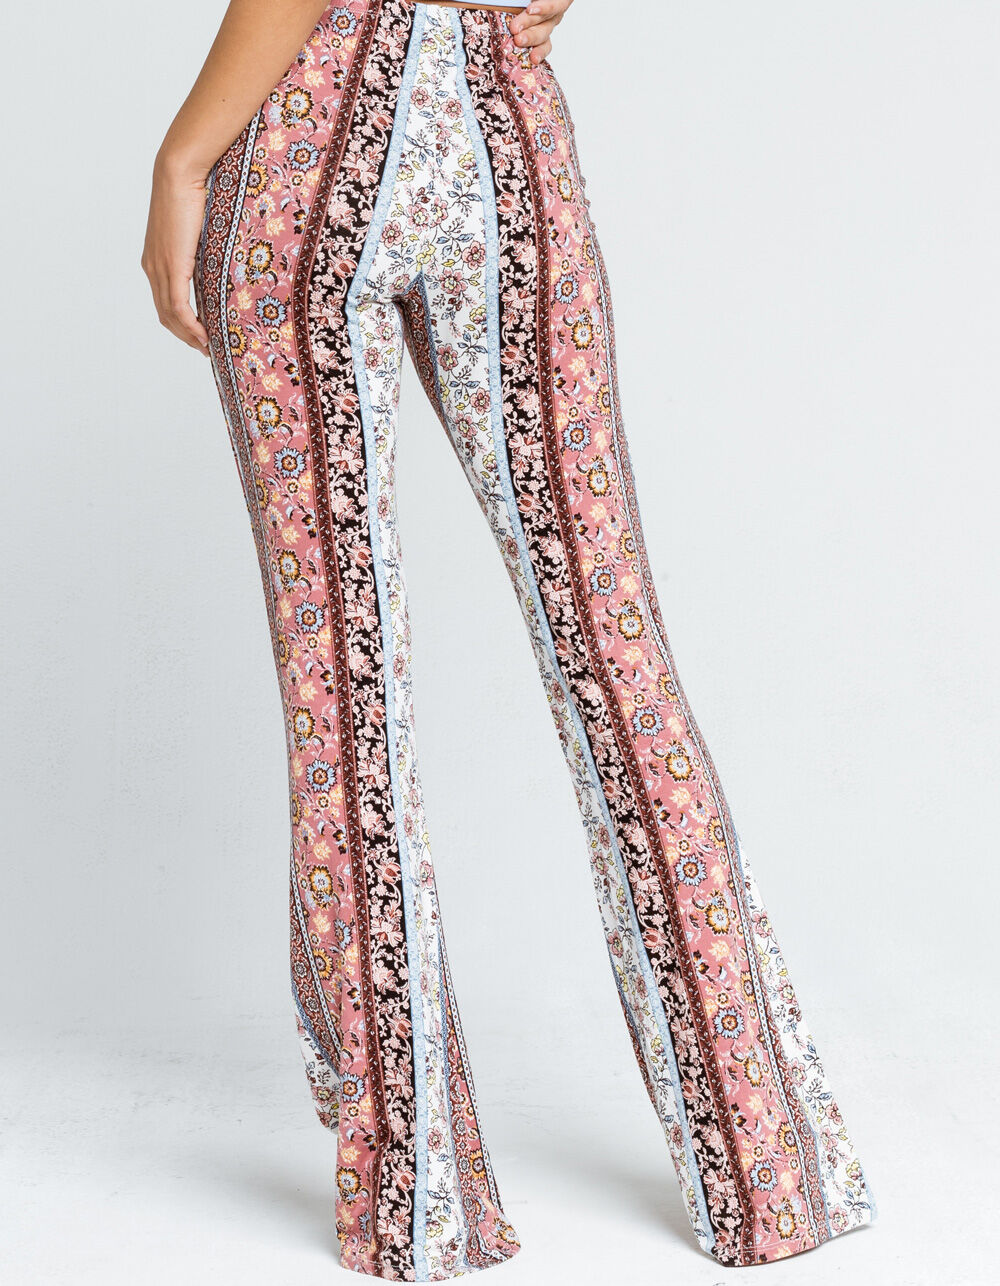 SKY AND SPARROW Garden Floral Womens Flare Pants - MULTI | Tillys